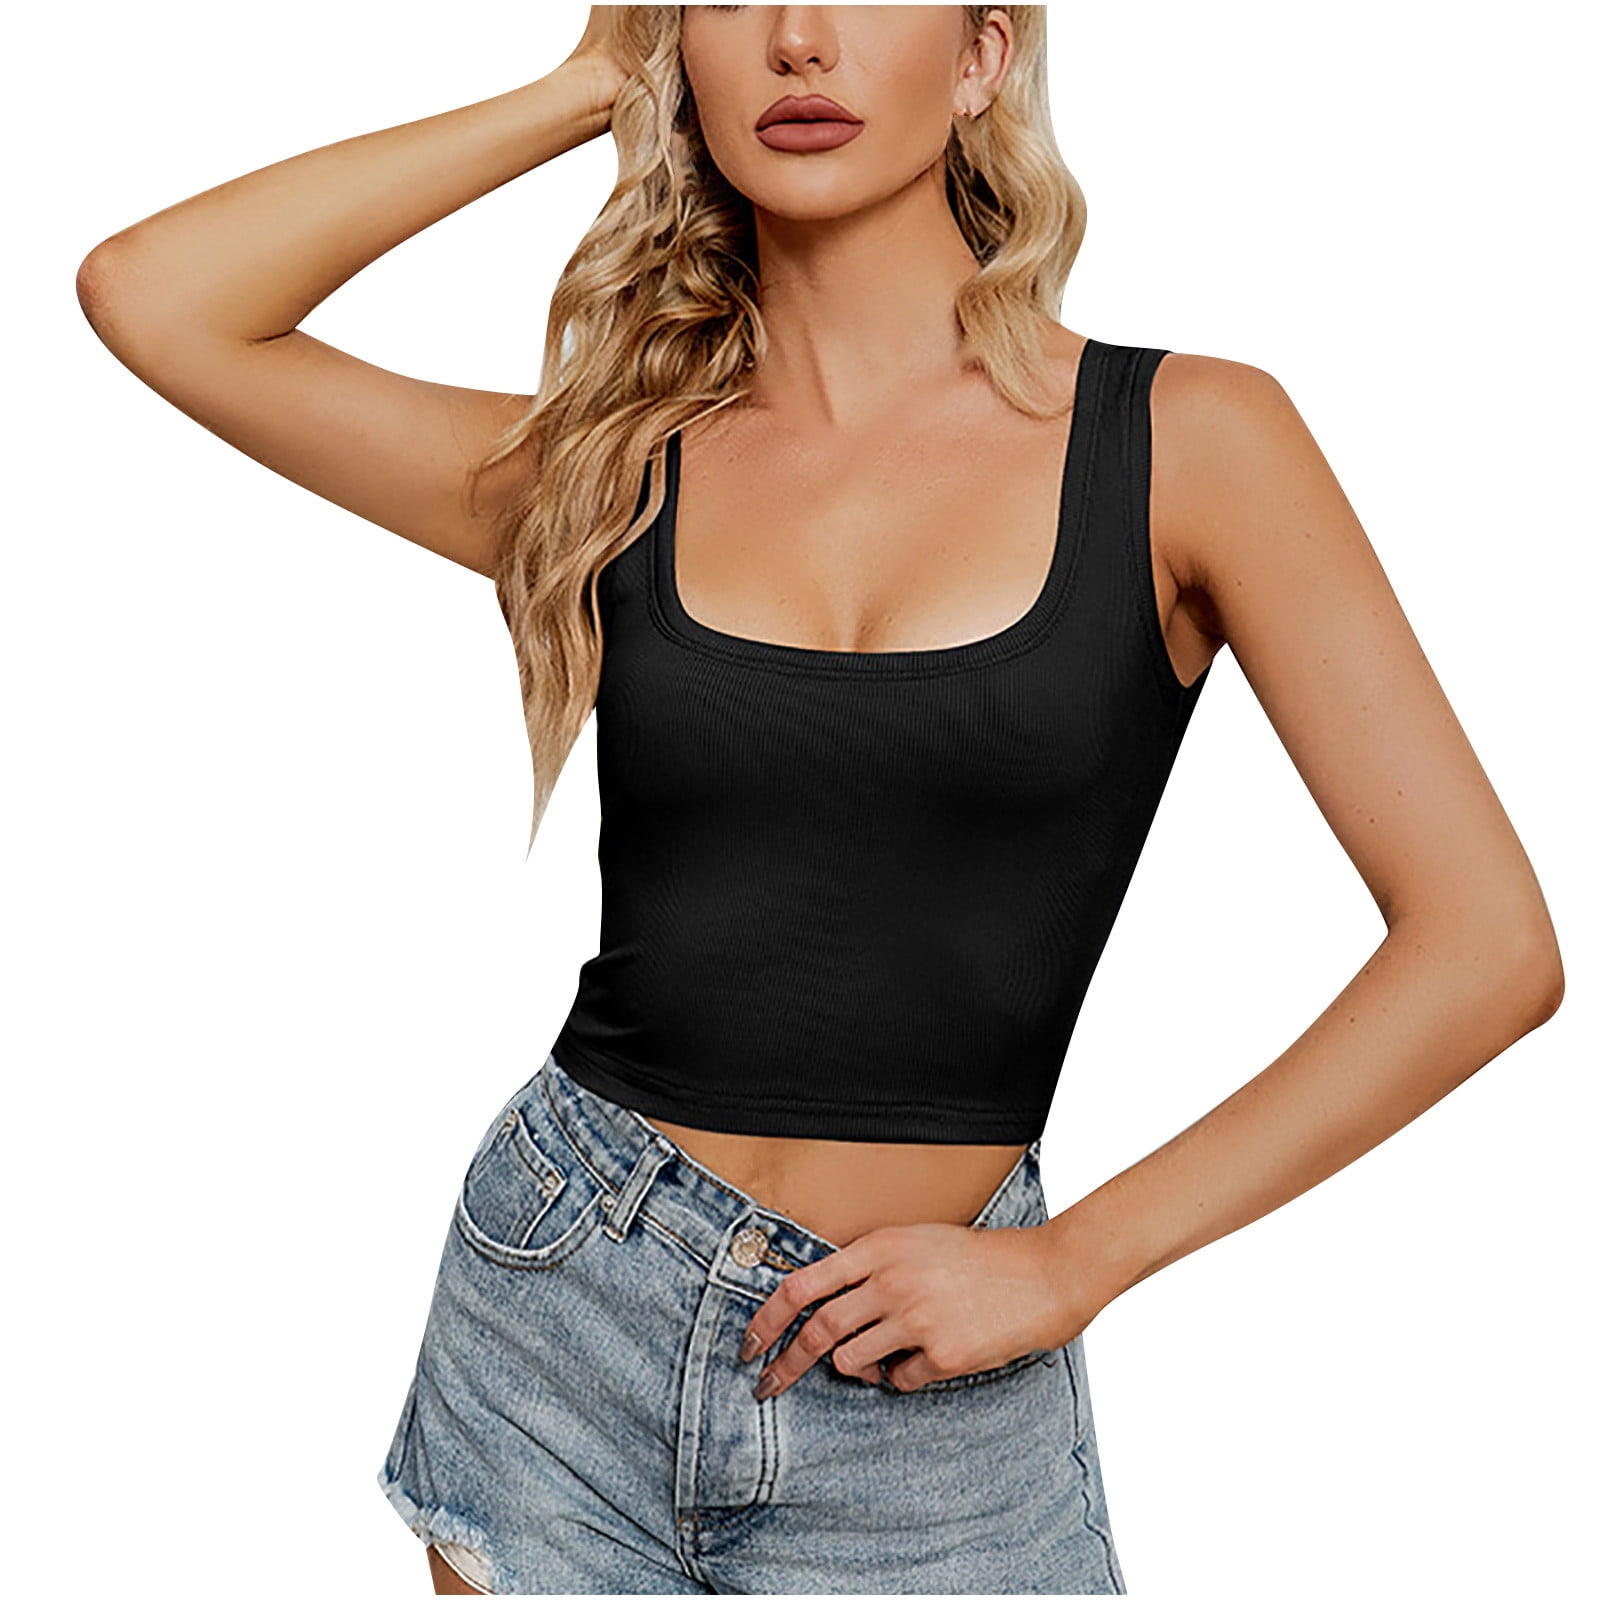 EHQJNJ Camisole Tops for Women Lace Crop Women National Style Positioning  Printing Sleeveless T Shirt Women Vest Camisole Tops for Women Plus Size